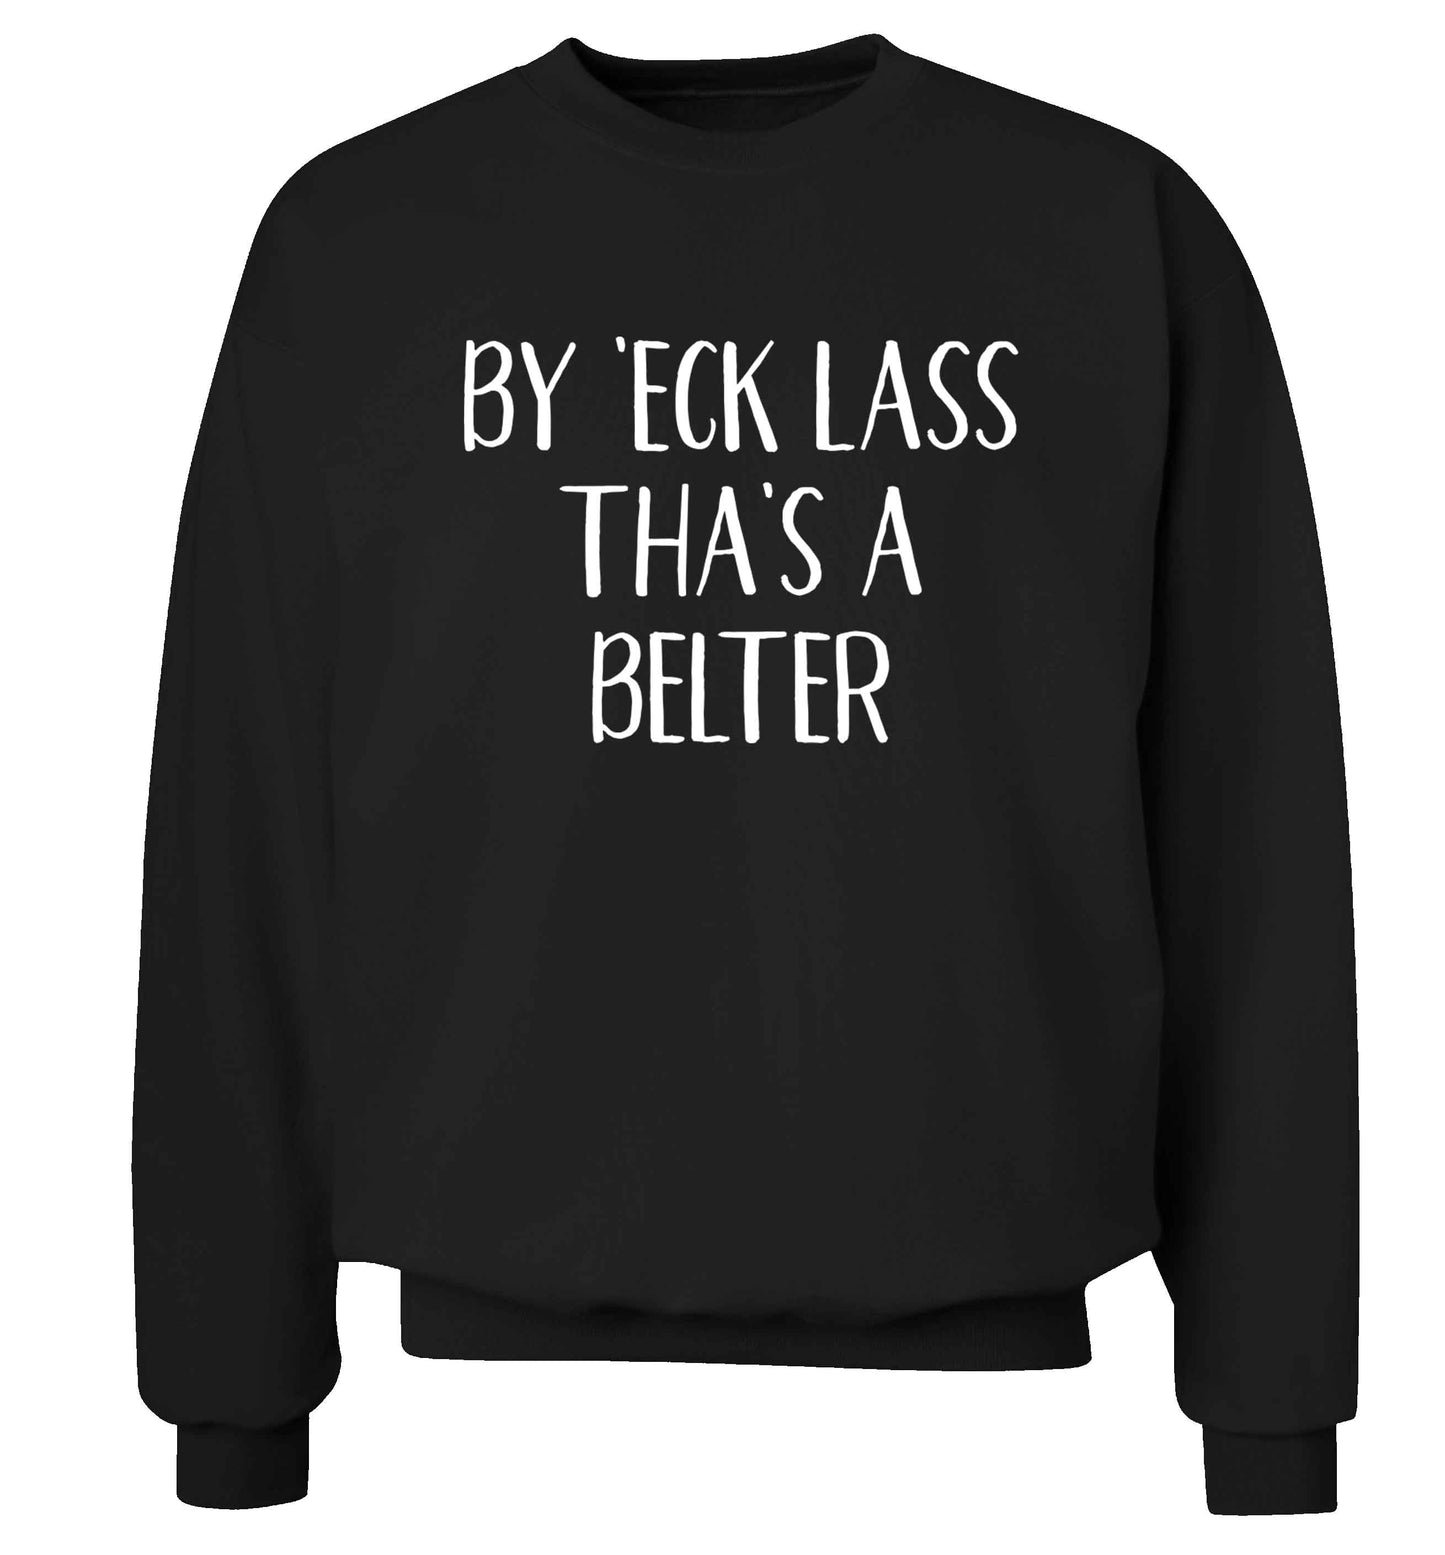 Be 'eck lass tha's a belter Adult's unisex black Sweater 2XL